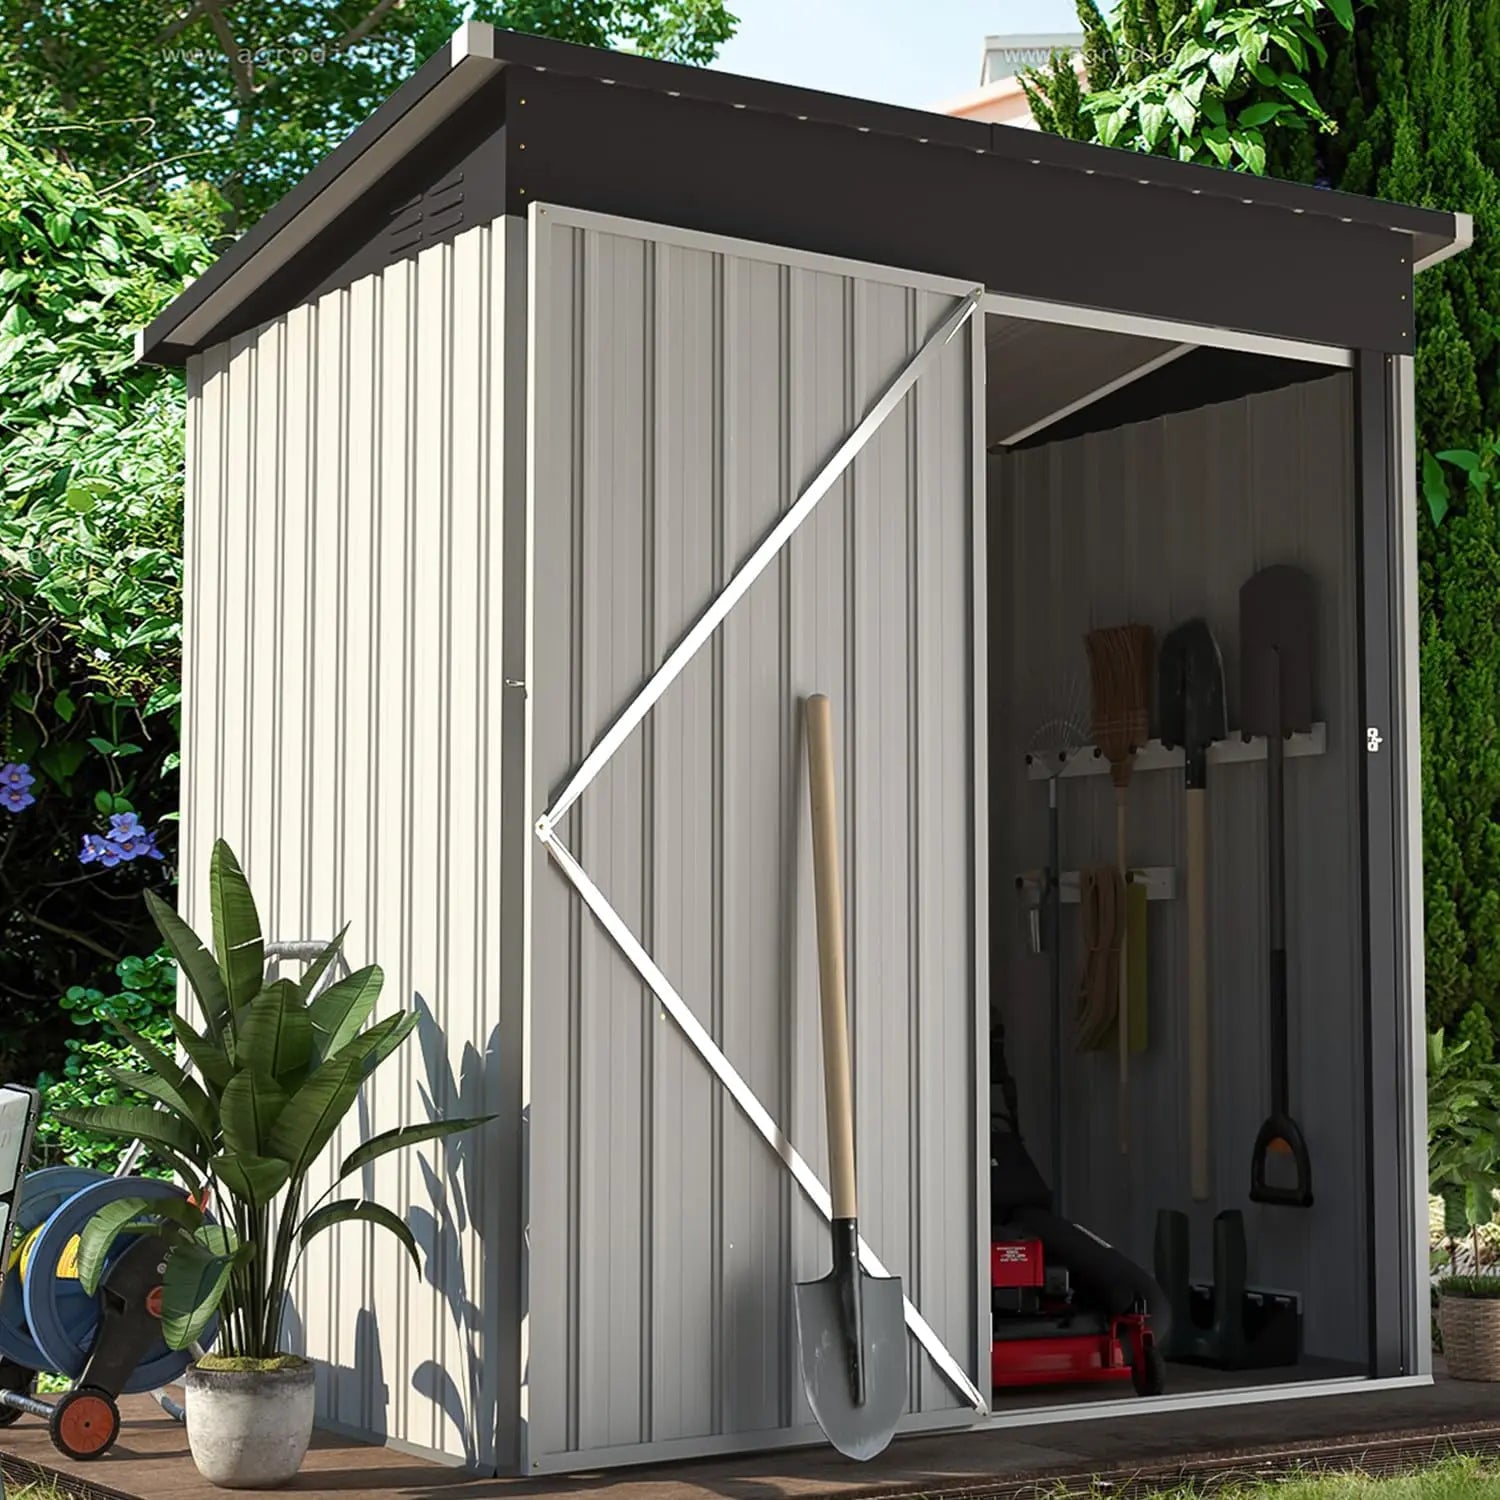 Metal Outdoor Storage Shed, Lockable Bike Shed, Garden Shed & Tool Shed for Backyard, Patio, Lawn, Brown/White - Farefe